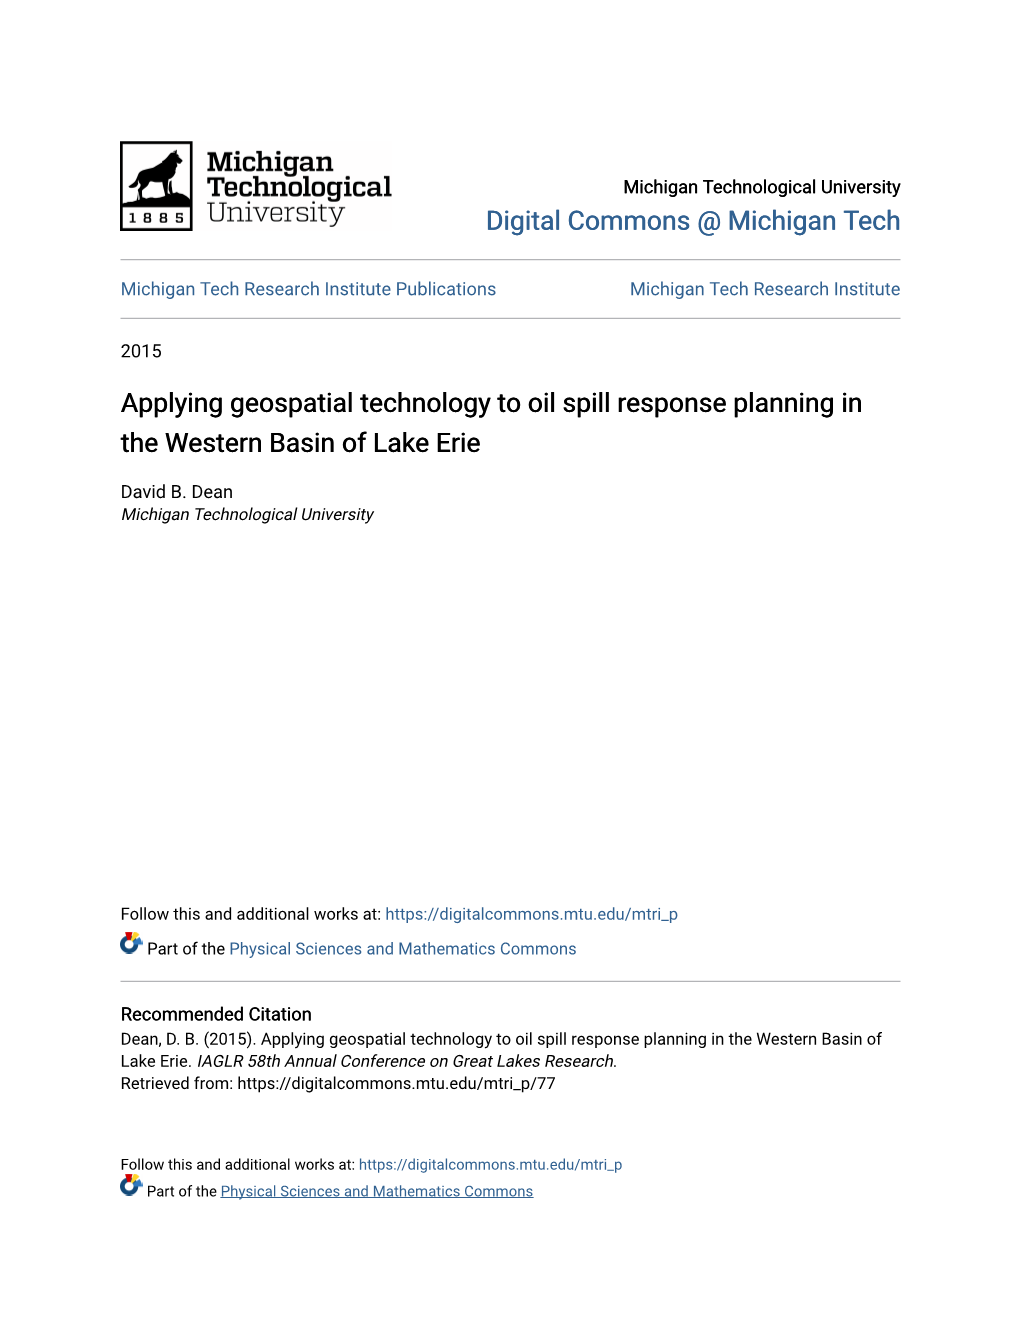 Applying Geospatial Technology to Oil Spill Response Planning in the Western Basin of Lake Erie